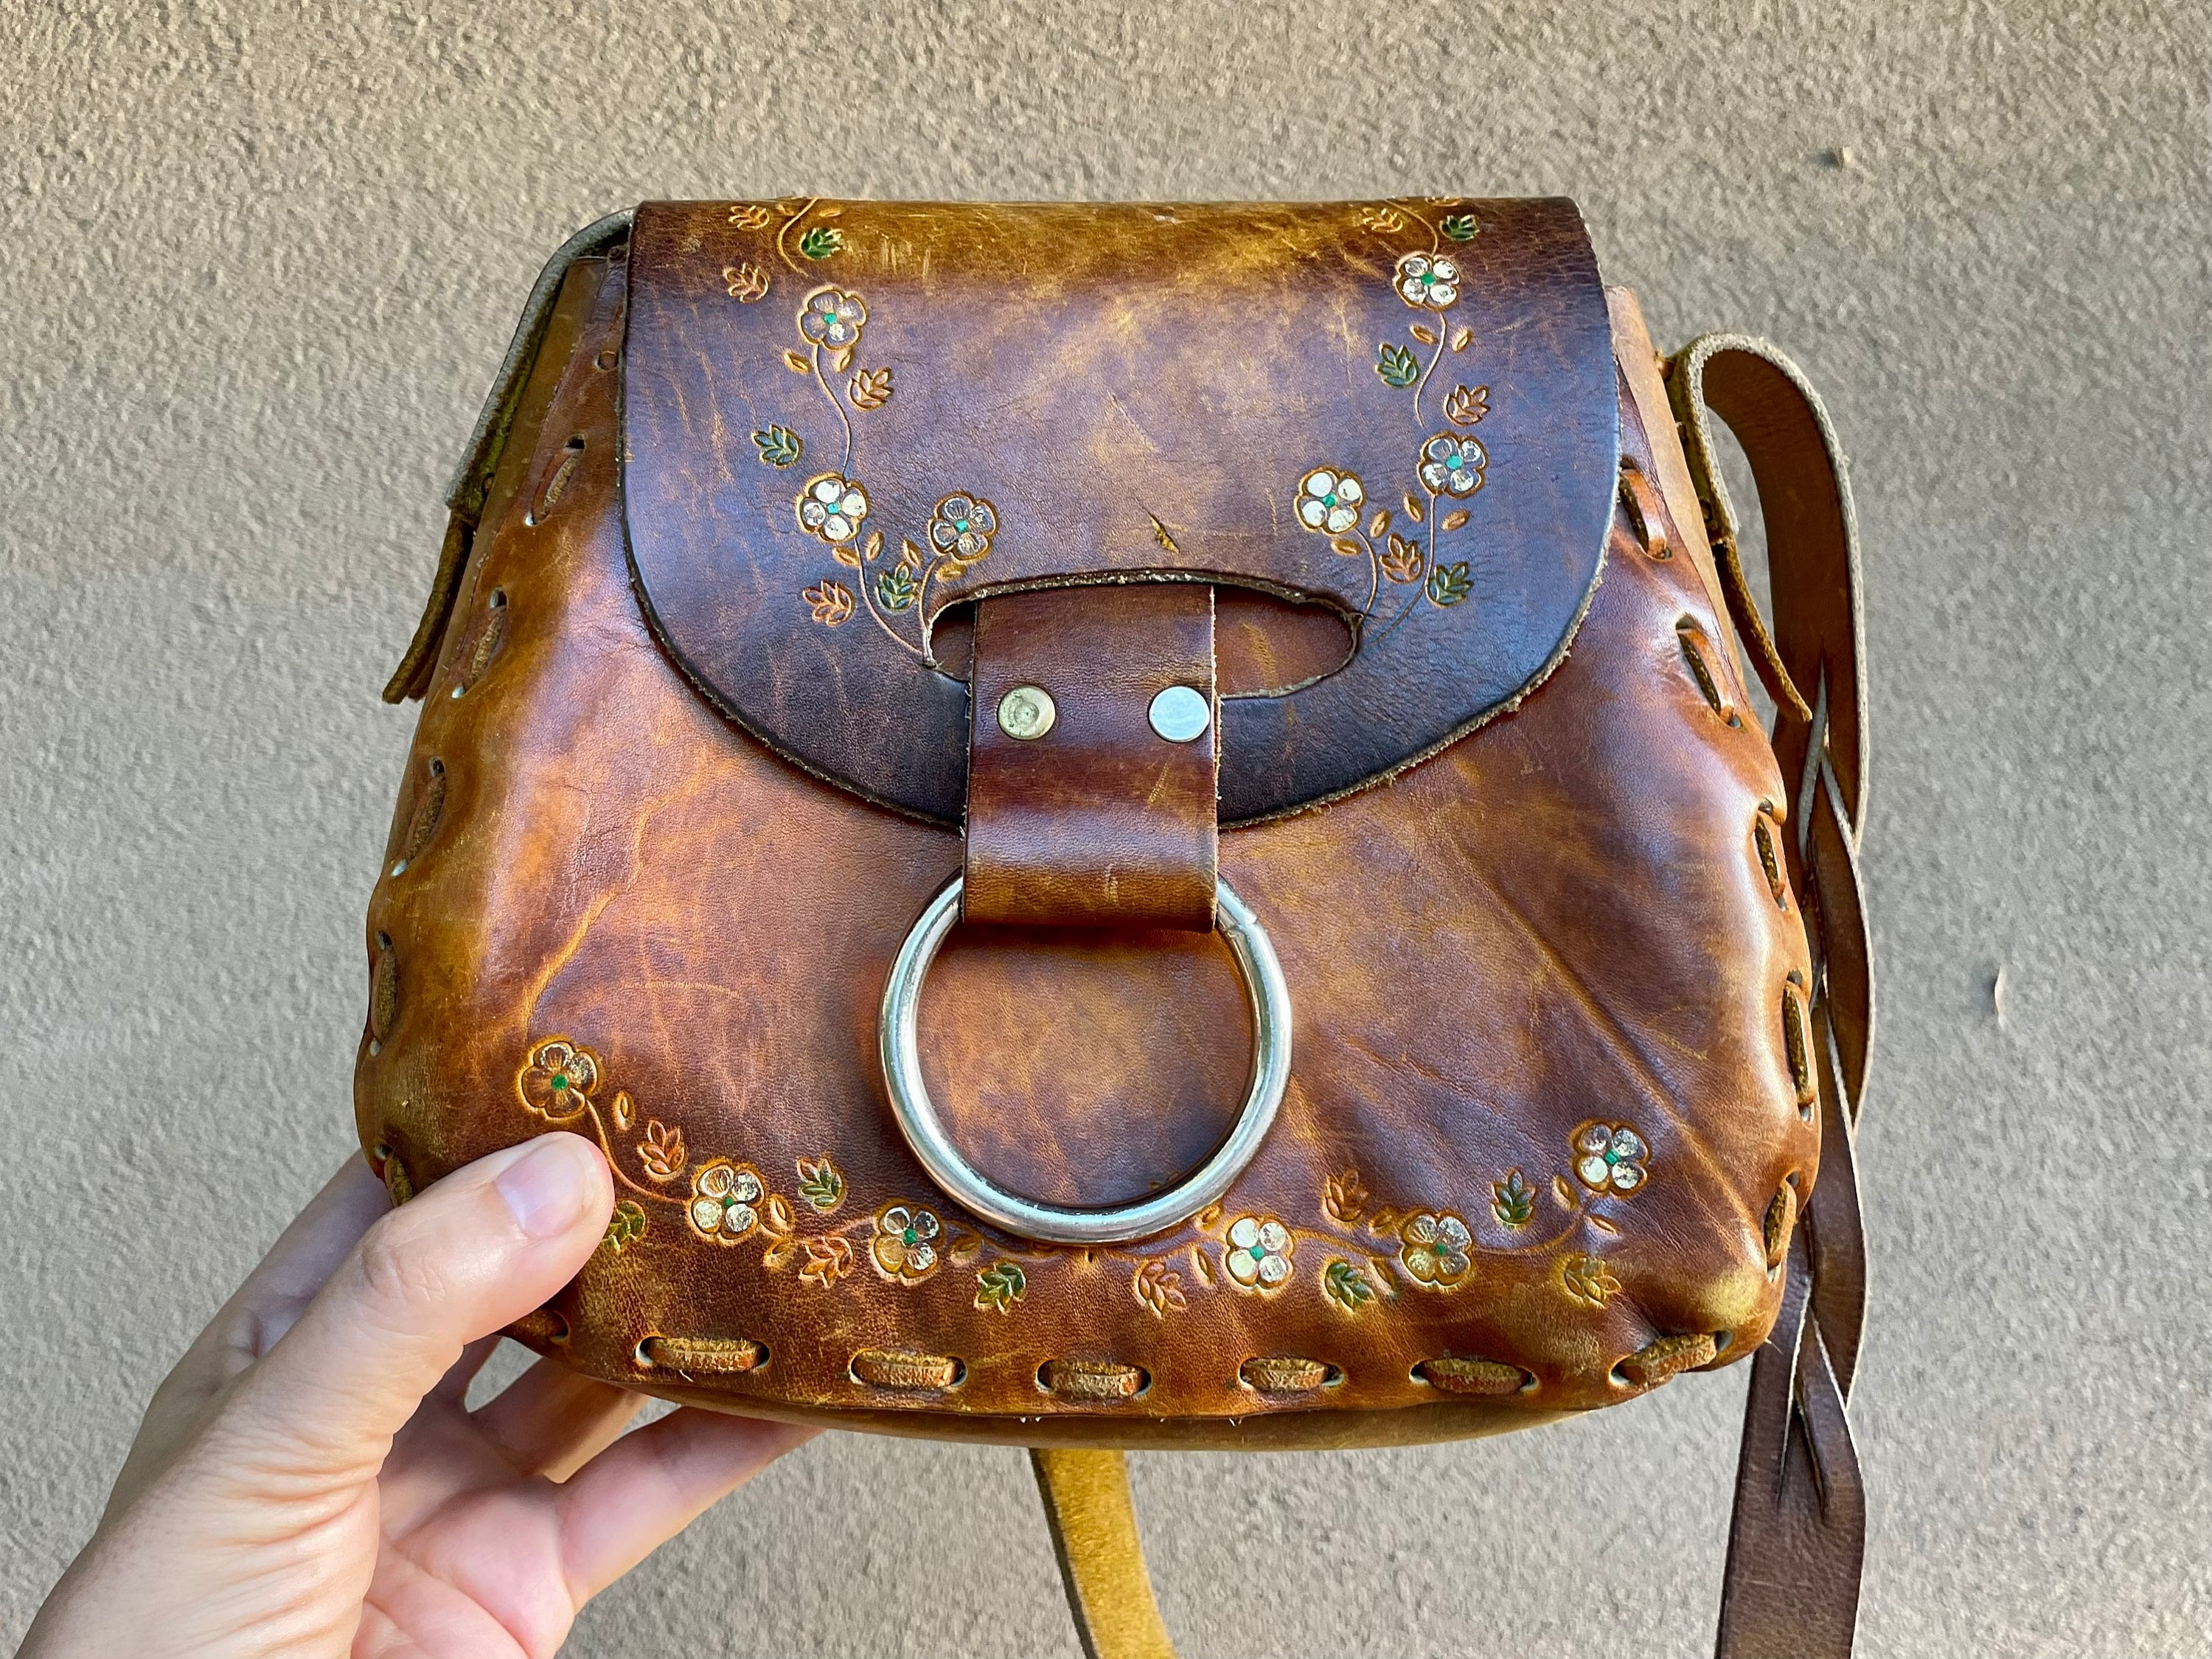 Vintage 70s Tooled Leather Floral Purse